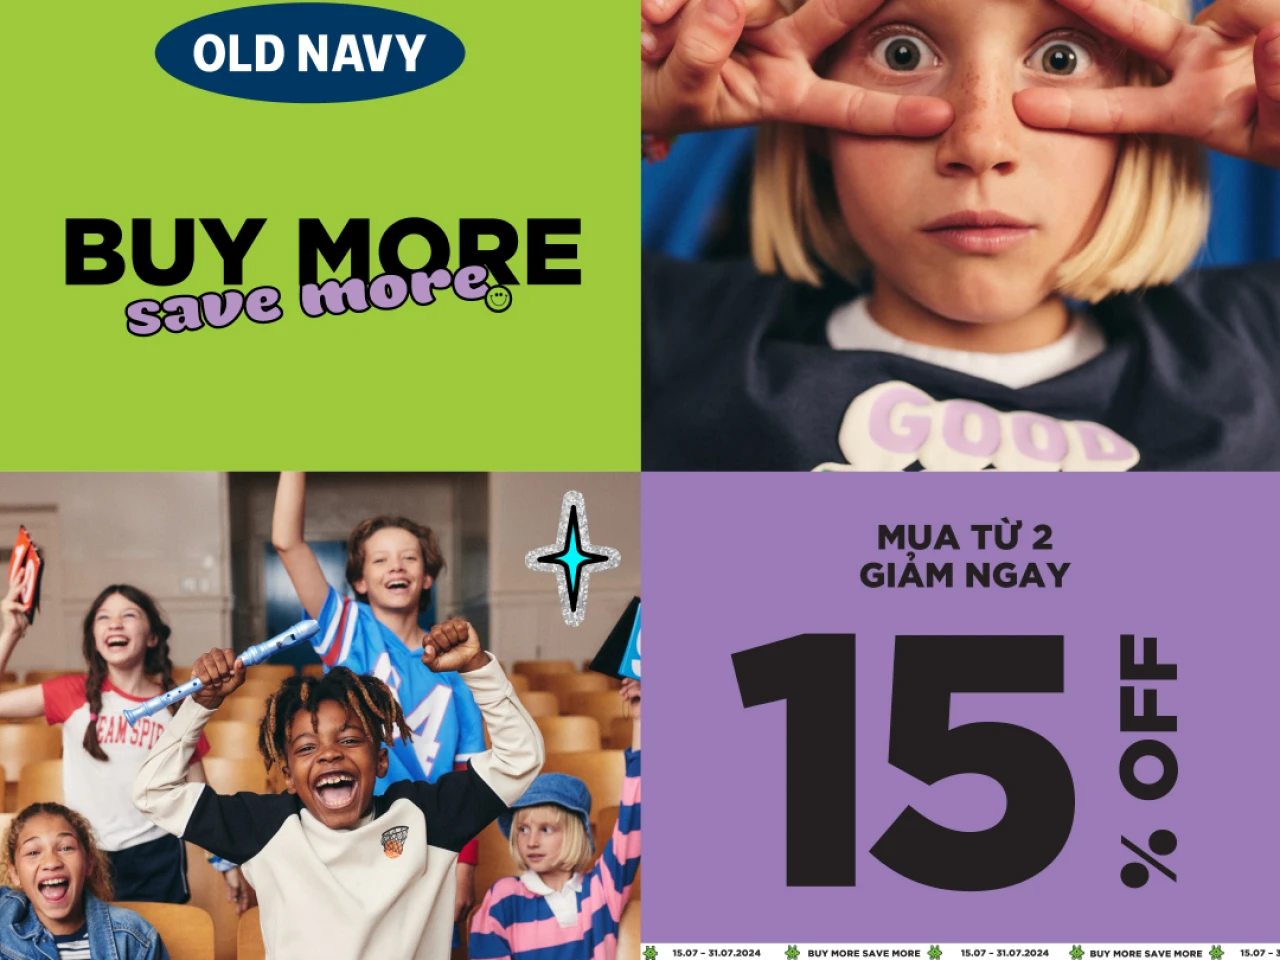 SHOP AT OLD NAVY - BUY MORE SAVE MORE